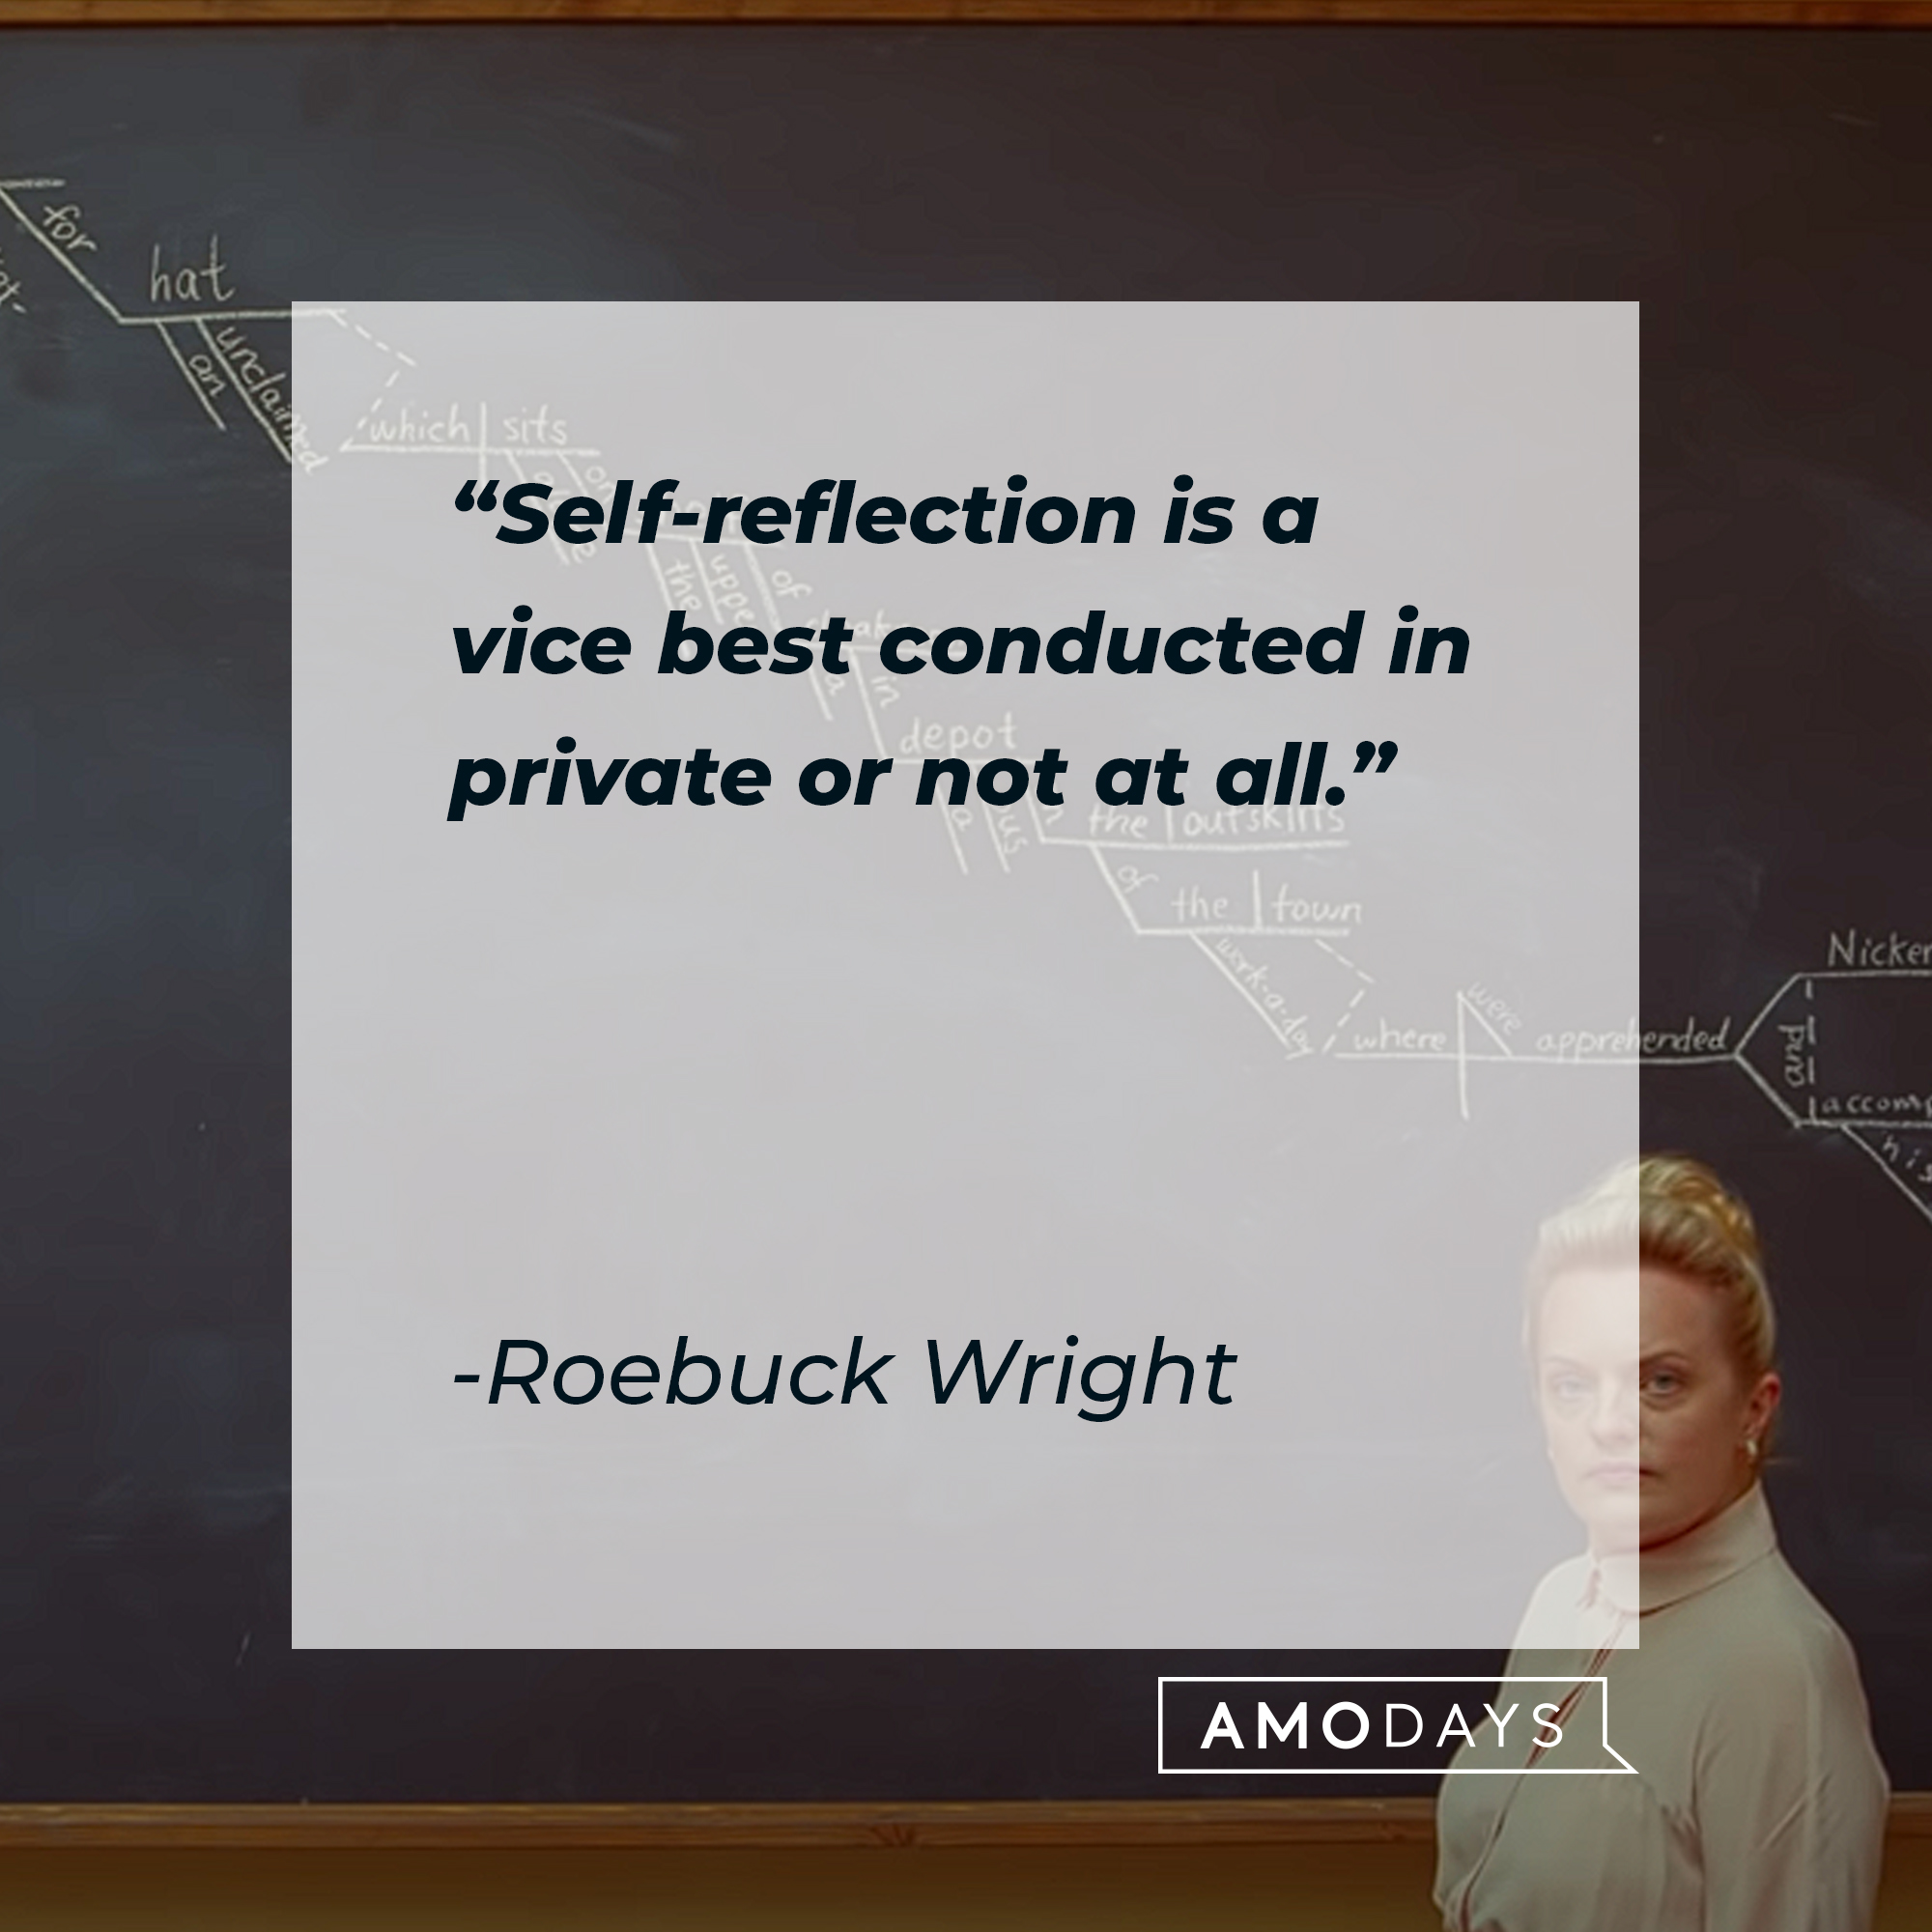 Roebuck Wright's quote:  "Self-reflection is a vice best conducted in private or not at all."  | Source: youtube.com/searchlightpictures